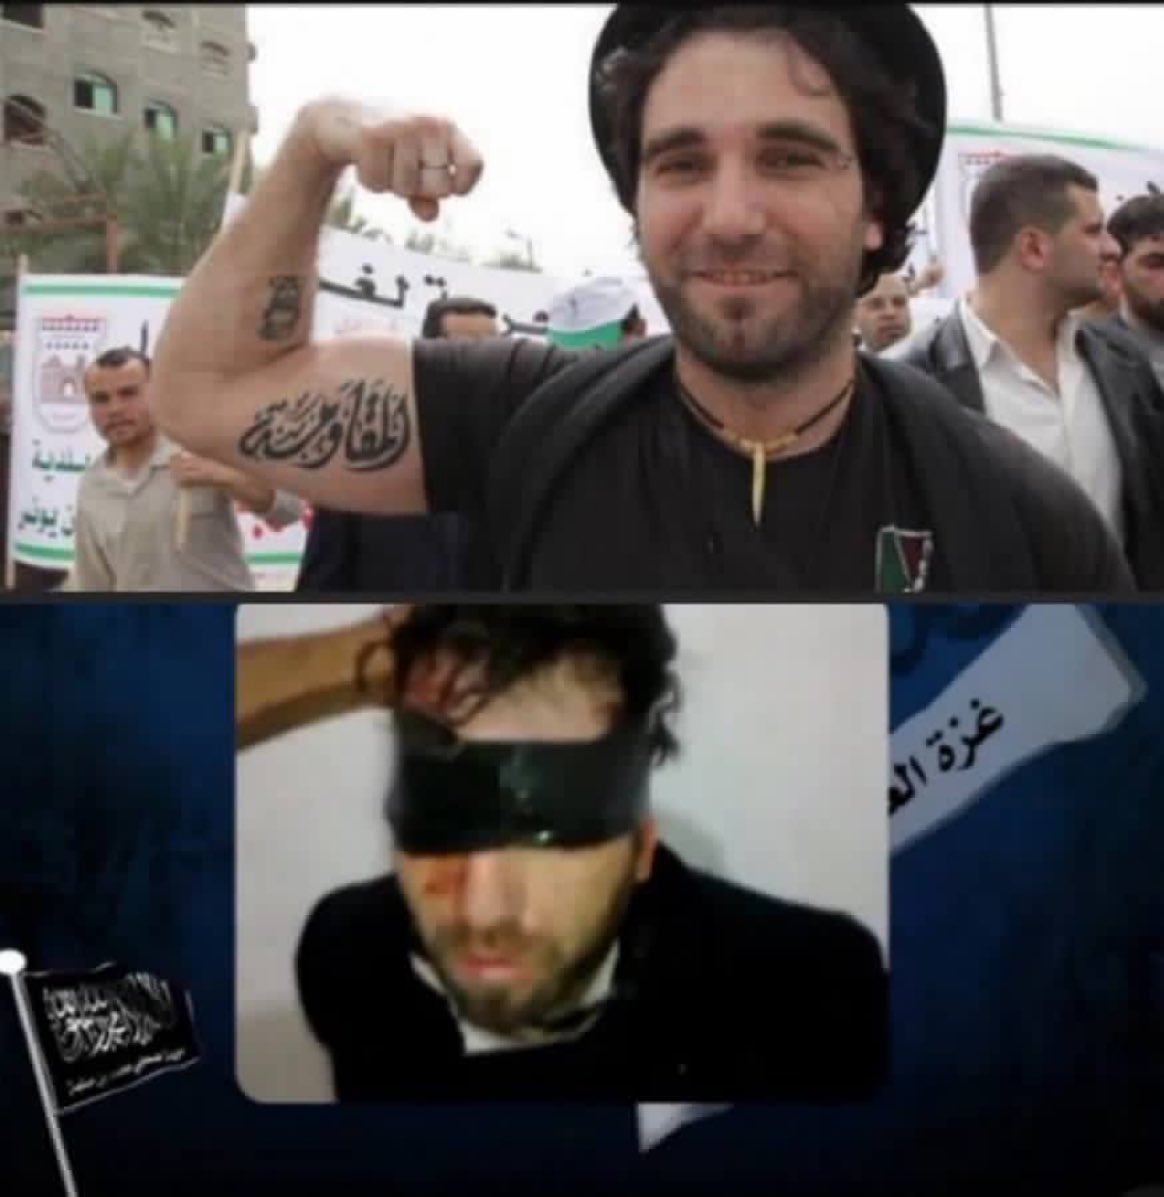 Reminder to Hamas terrorists supporters in West!

Vittorio Arrigoni was an Italian journalist and pro-Palestinian activist.
He moved to Gaza to support Palestinians.
He was kidnapped, tortured and killed by lslamists for being a Kaffir.